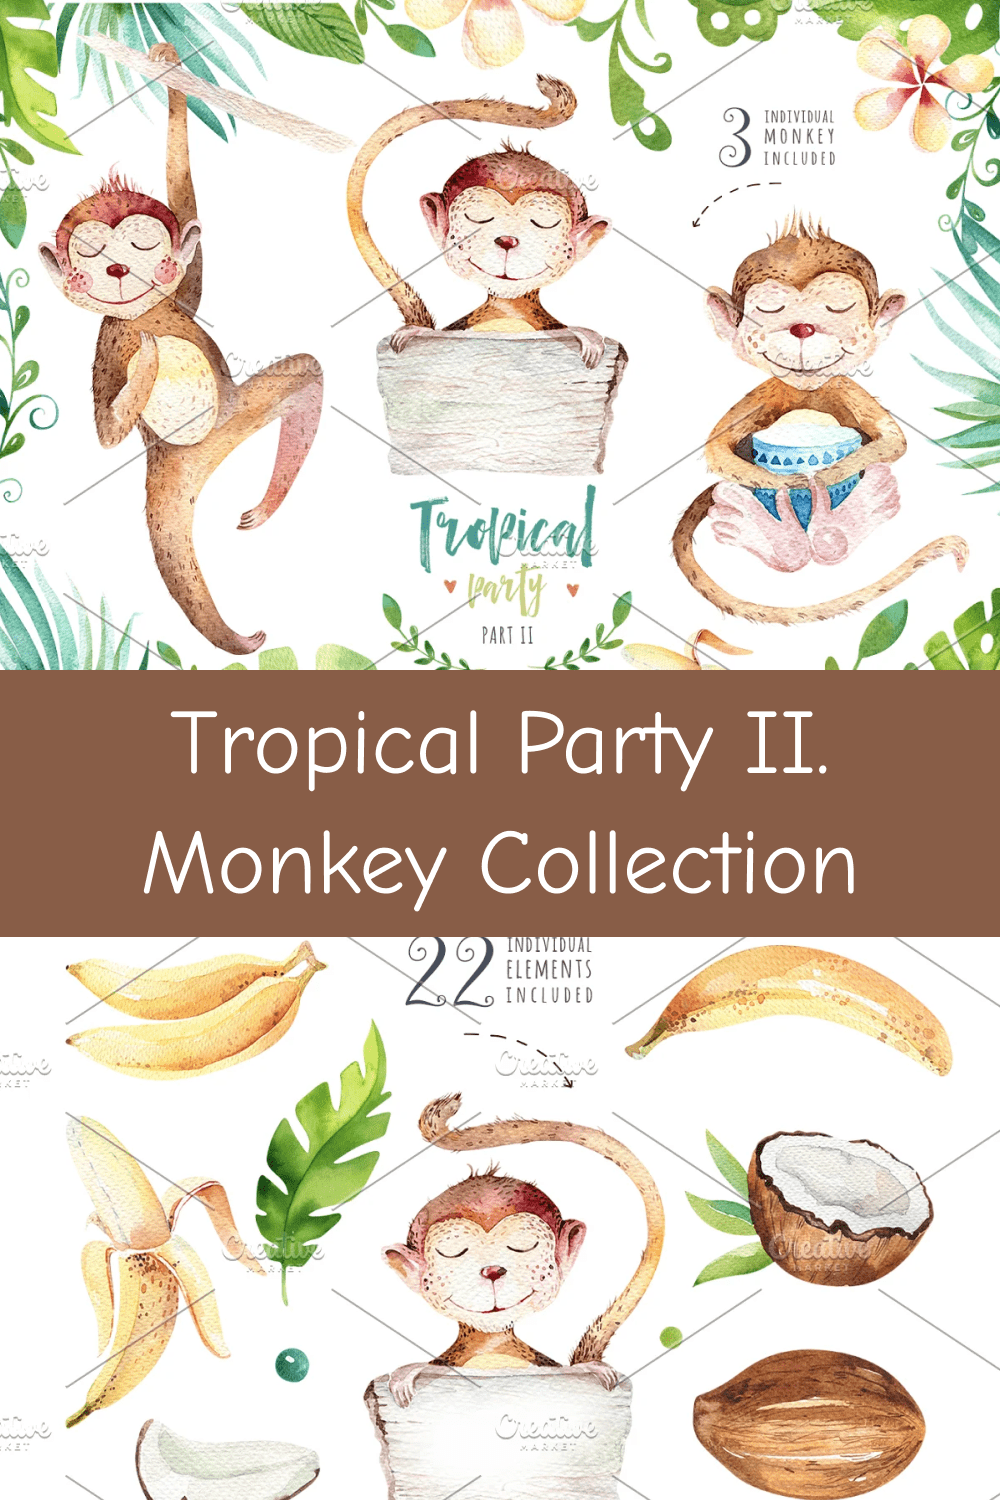 03 tropical party ii. monkey collection pinterest